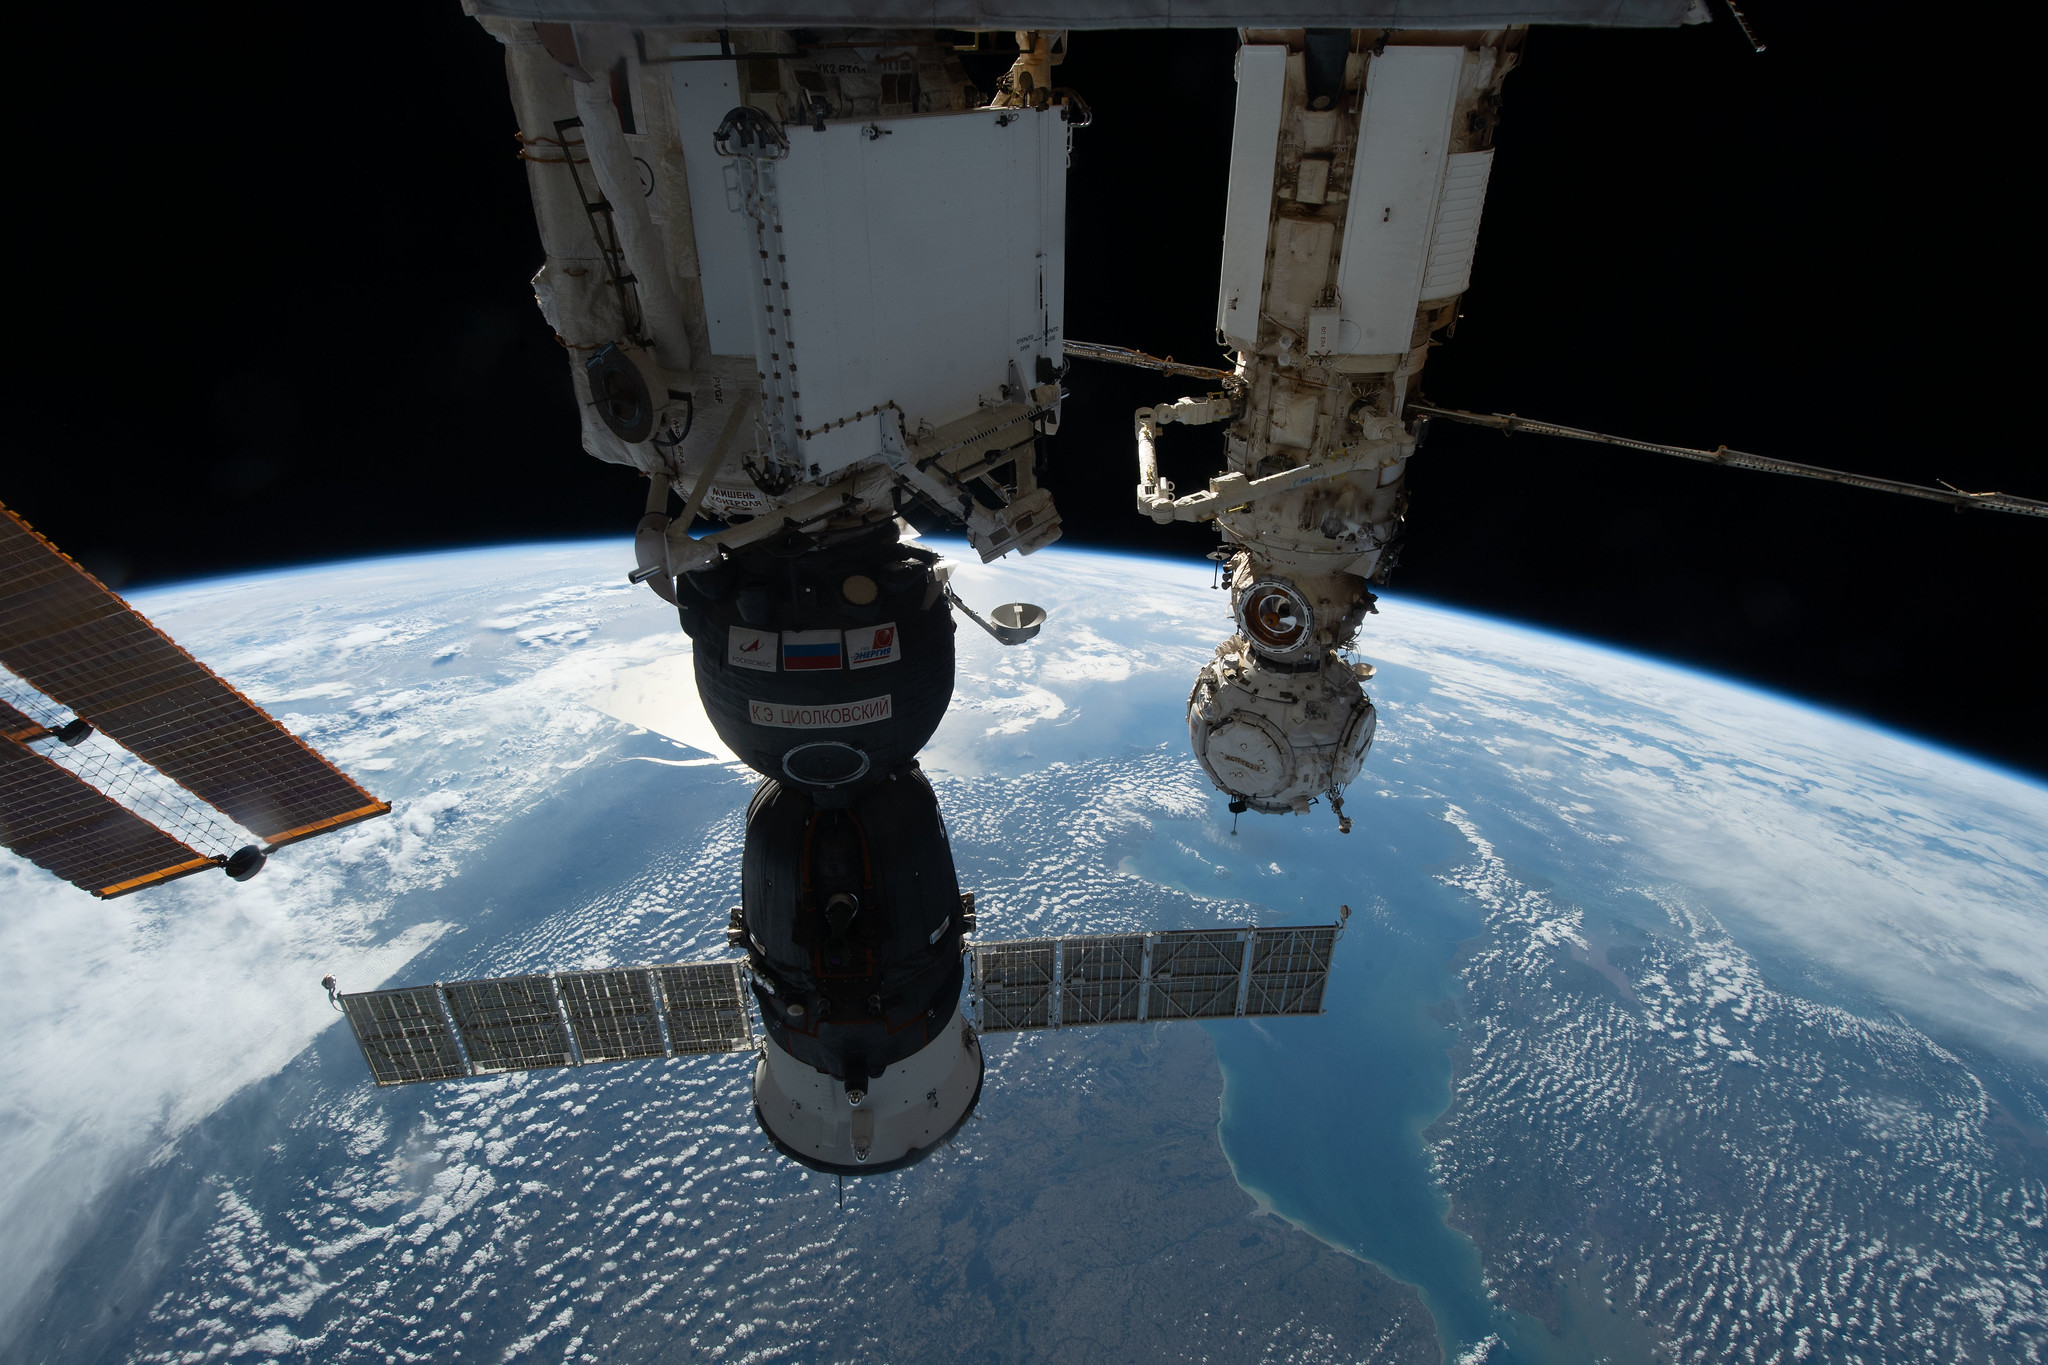 The Soyuz MS-22 crew ship is docked to the International Space Station with the Earth in the background.